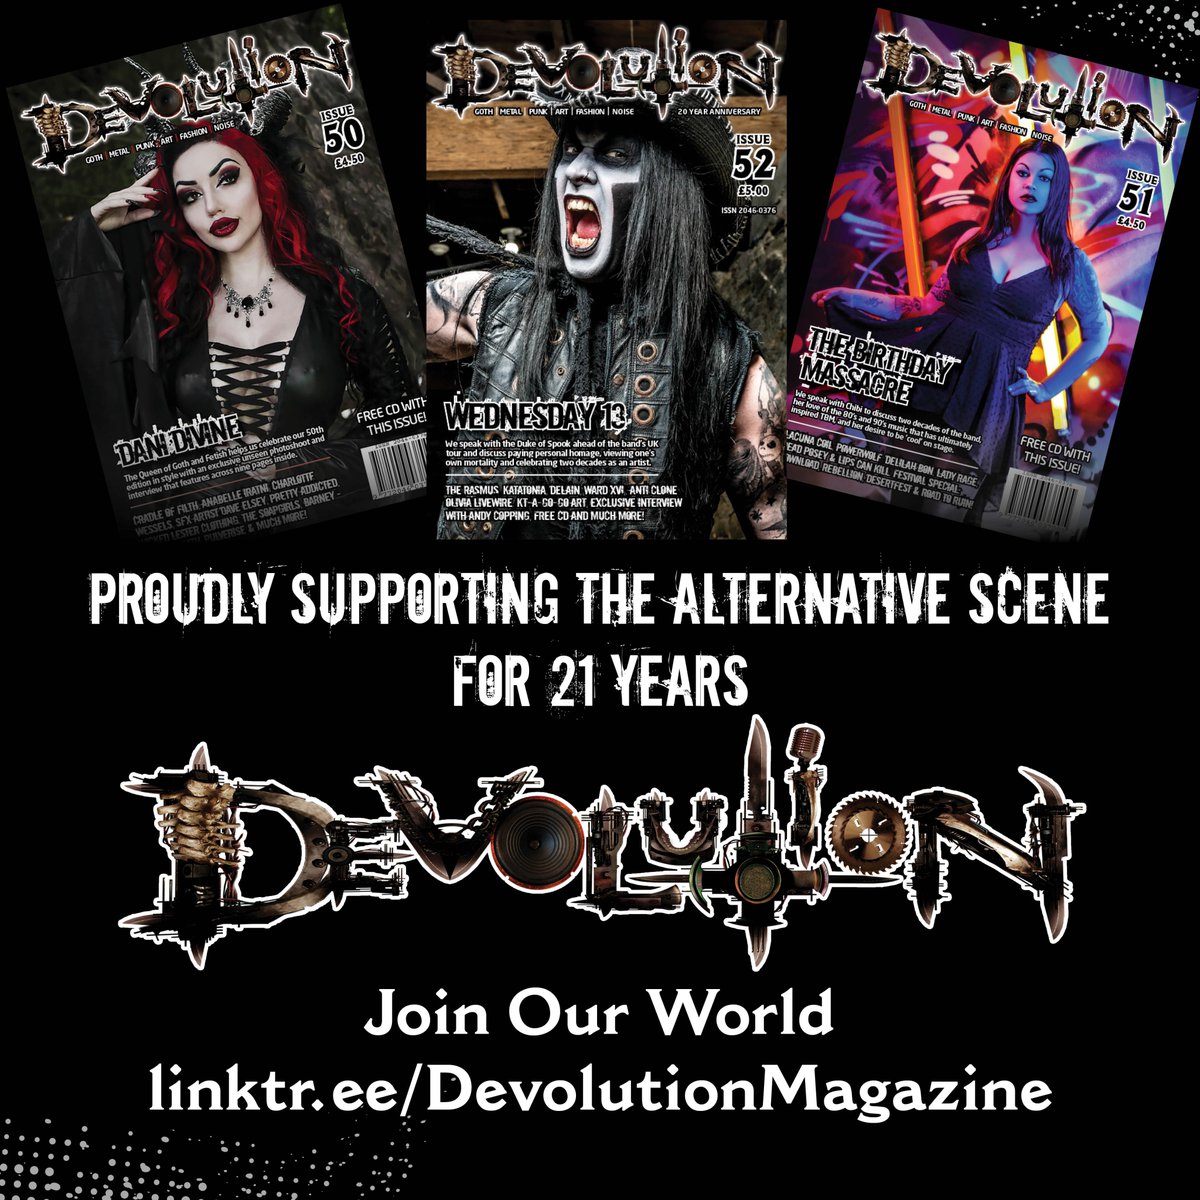 TODAY WE CELEBRATE 21 YEARS! ✨ We are undeniably proud to be commemorating this incredible Devolution Magazine milestone. Read more here: facebook.com/photo?fbid=985… Join Our World ~ linktr.ee/DevolutionMaga…